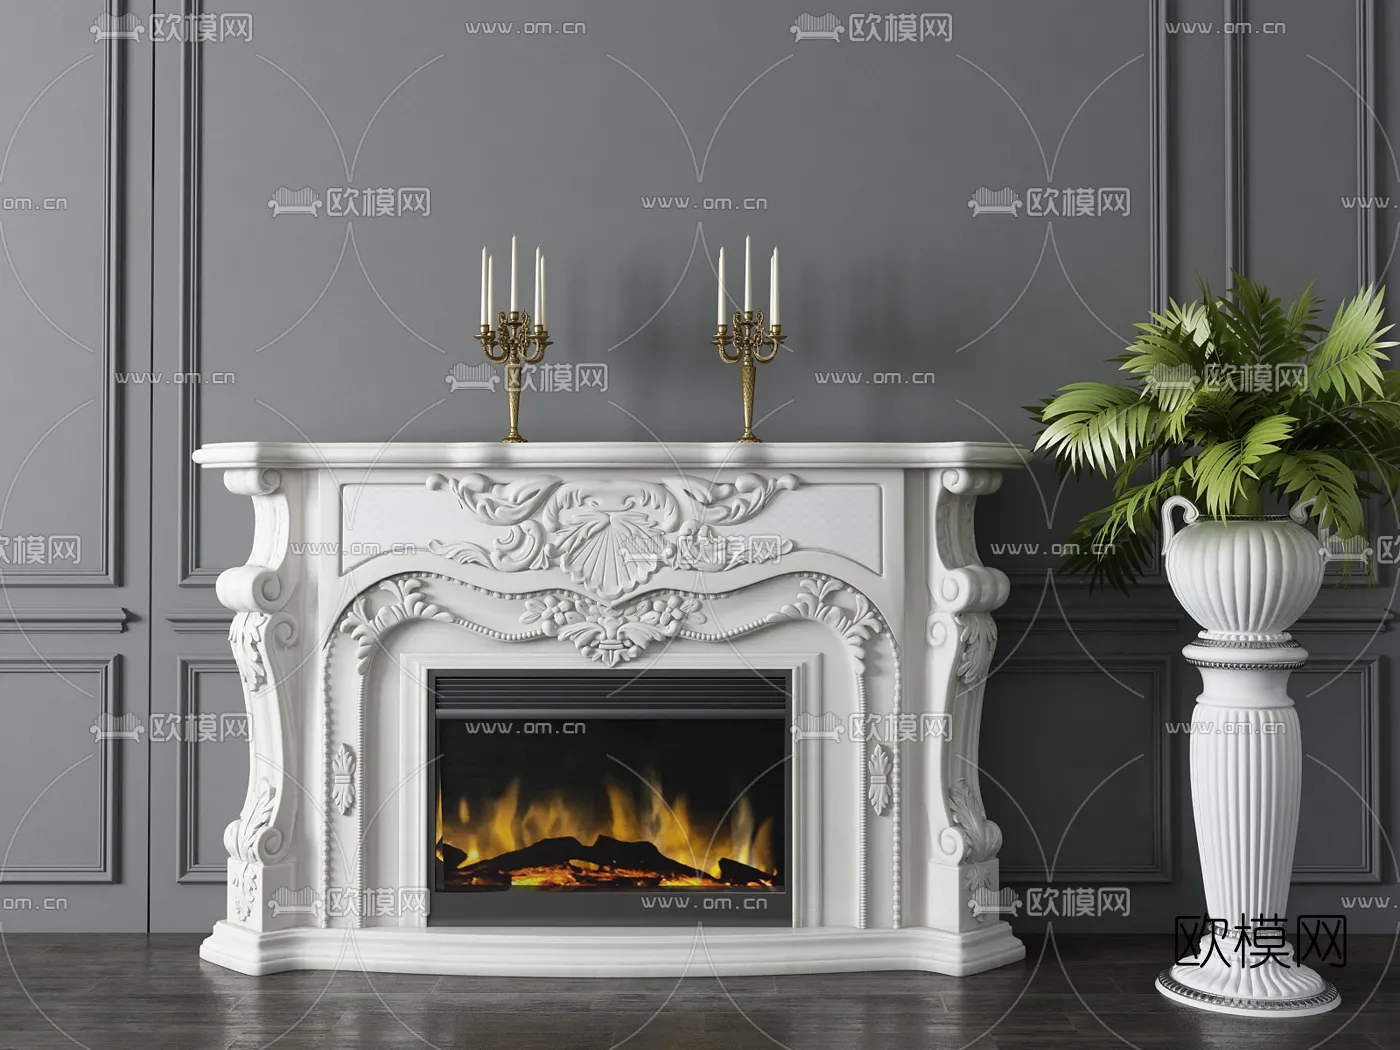 CLASSIC – FIREPLACE 3DMODELS – 048